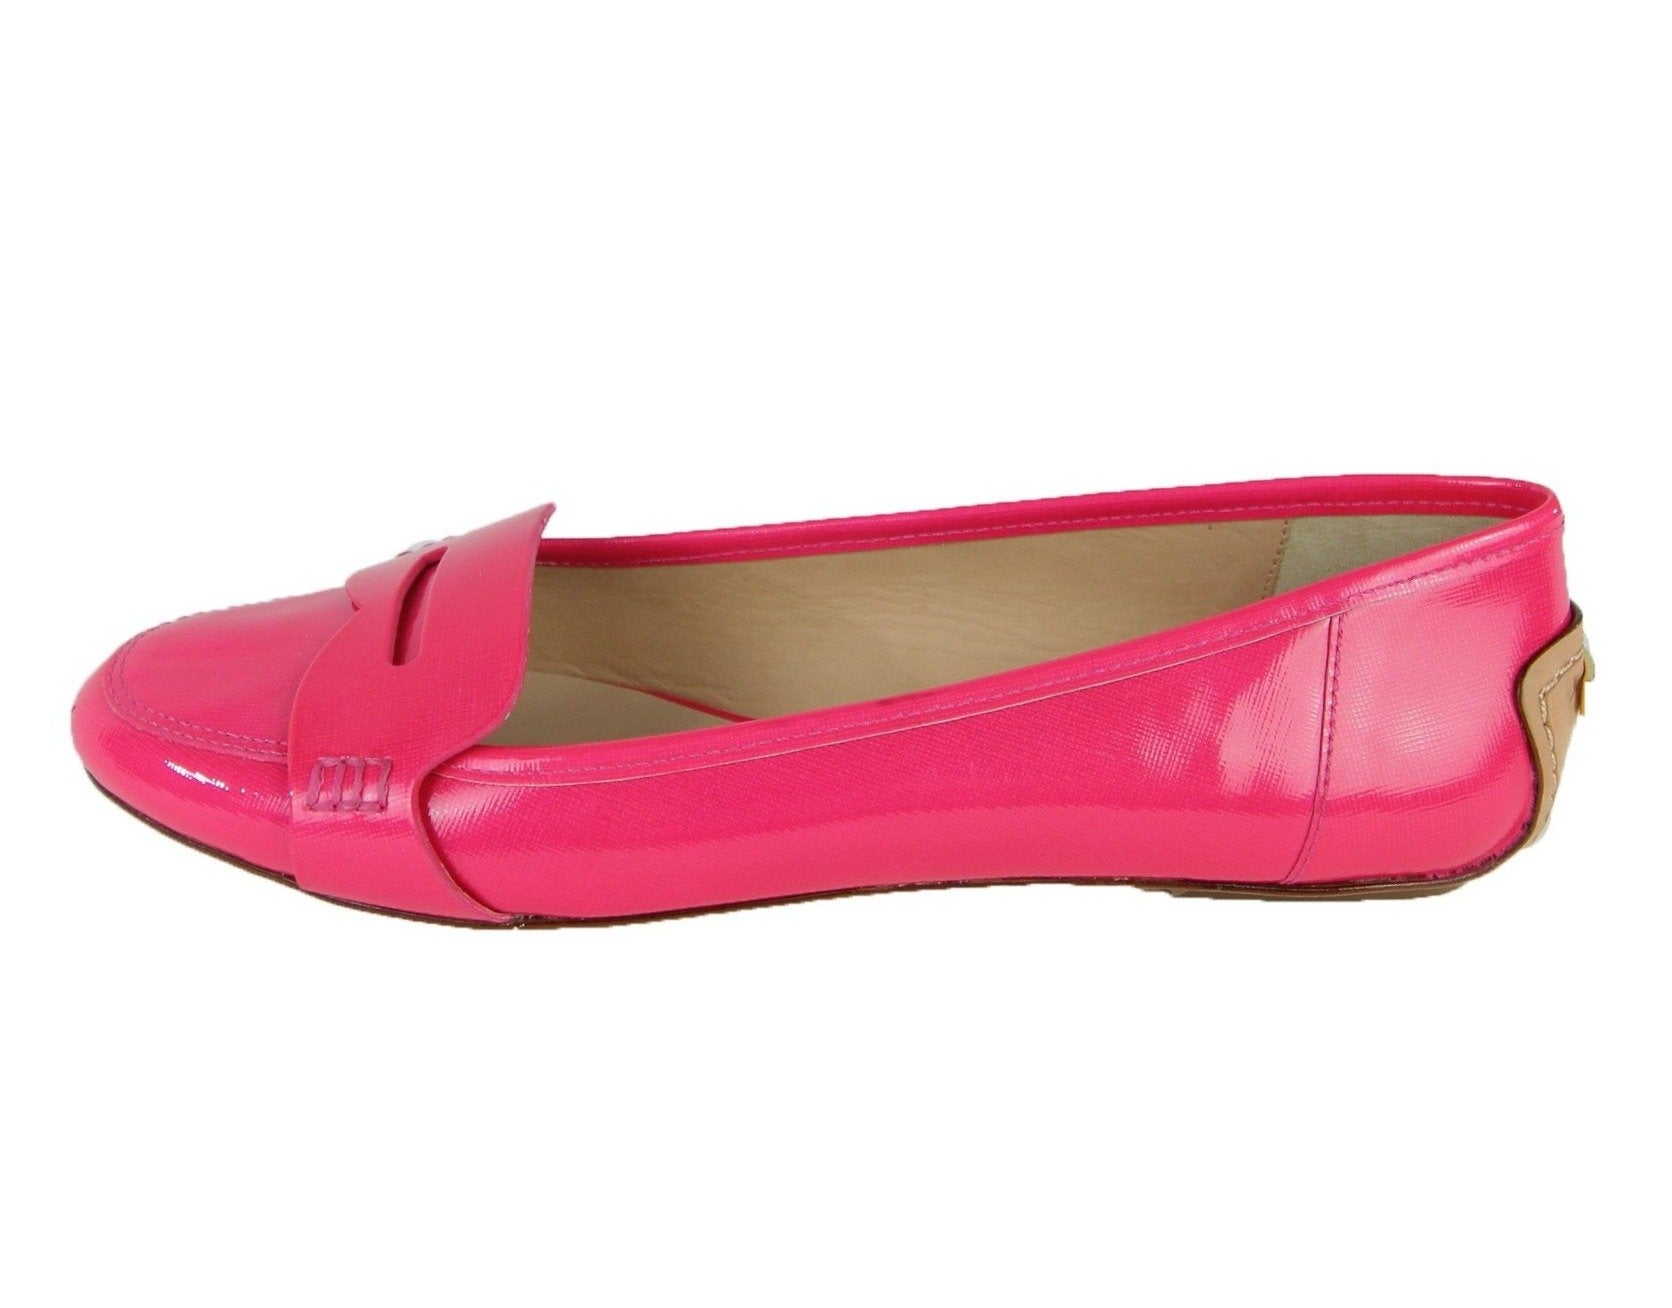 Pink Patent Loafer Sz 8.5